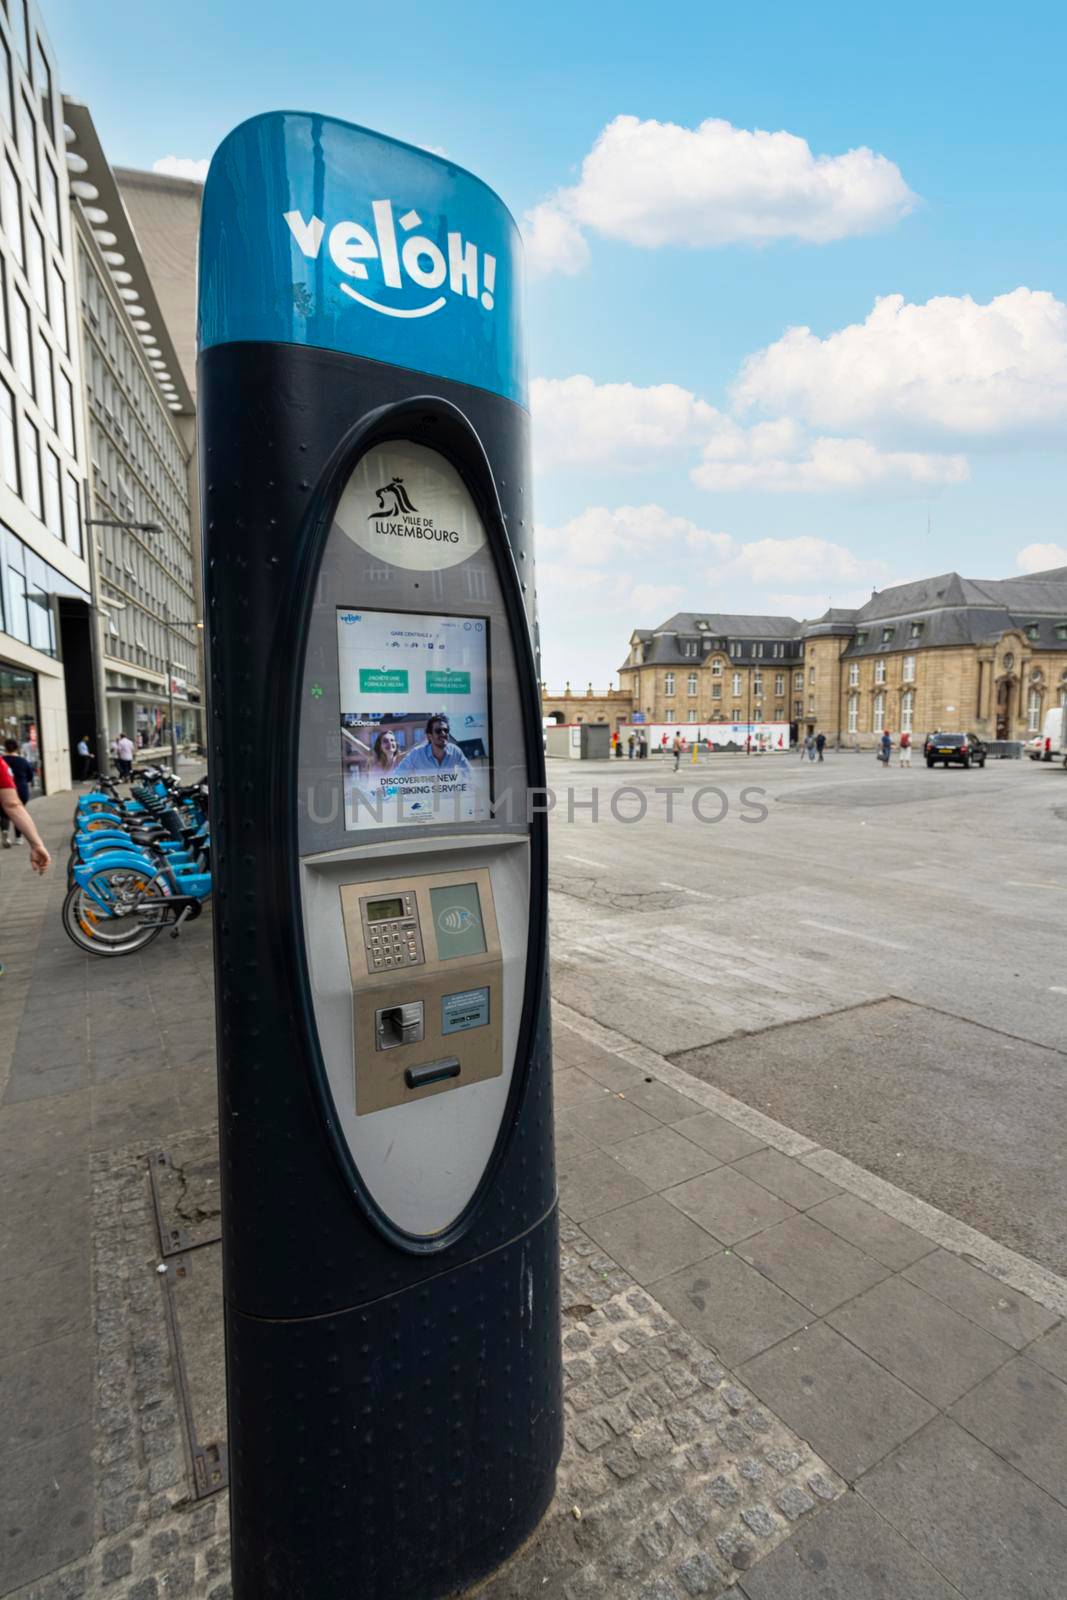 Luxembourg city, May 2022. the bicycle rental column in the city center